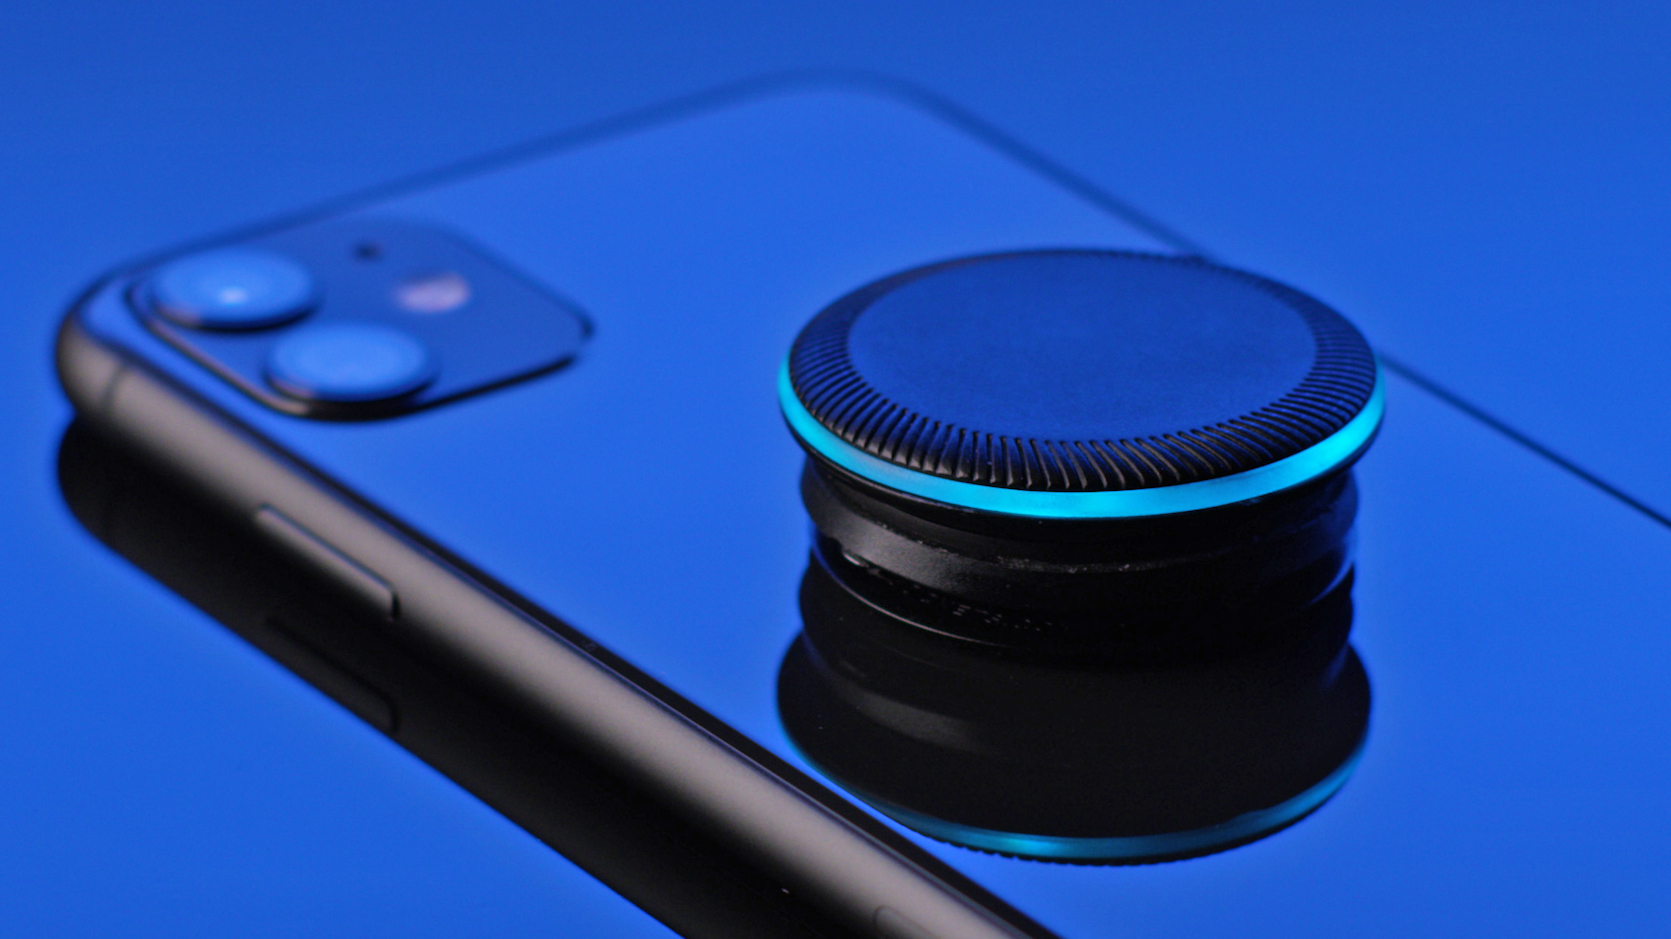 The TalkSocket wirelessly charges on a Qi-compatible pad like your smartphone does. (Image: TalkSocket)